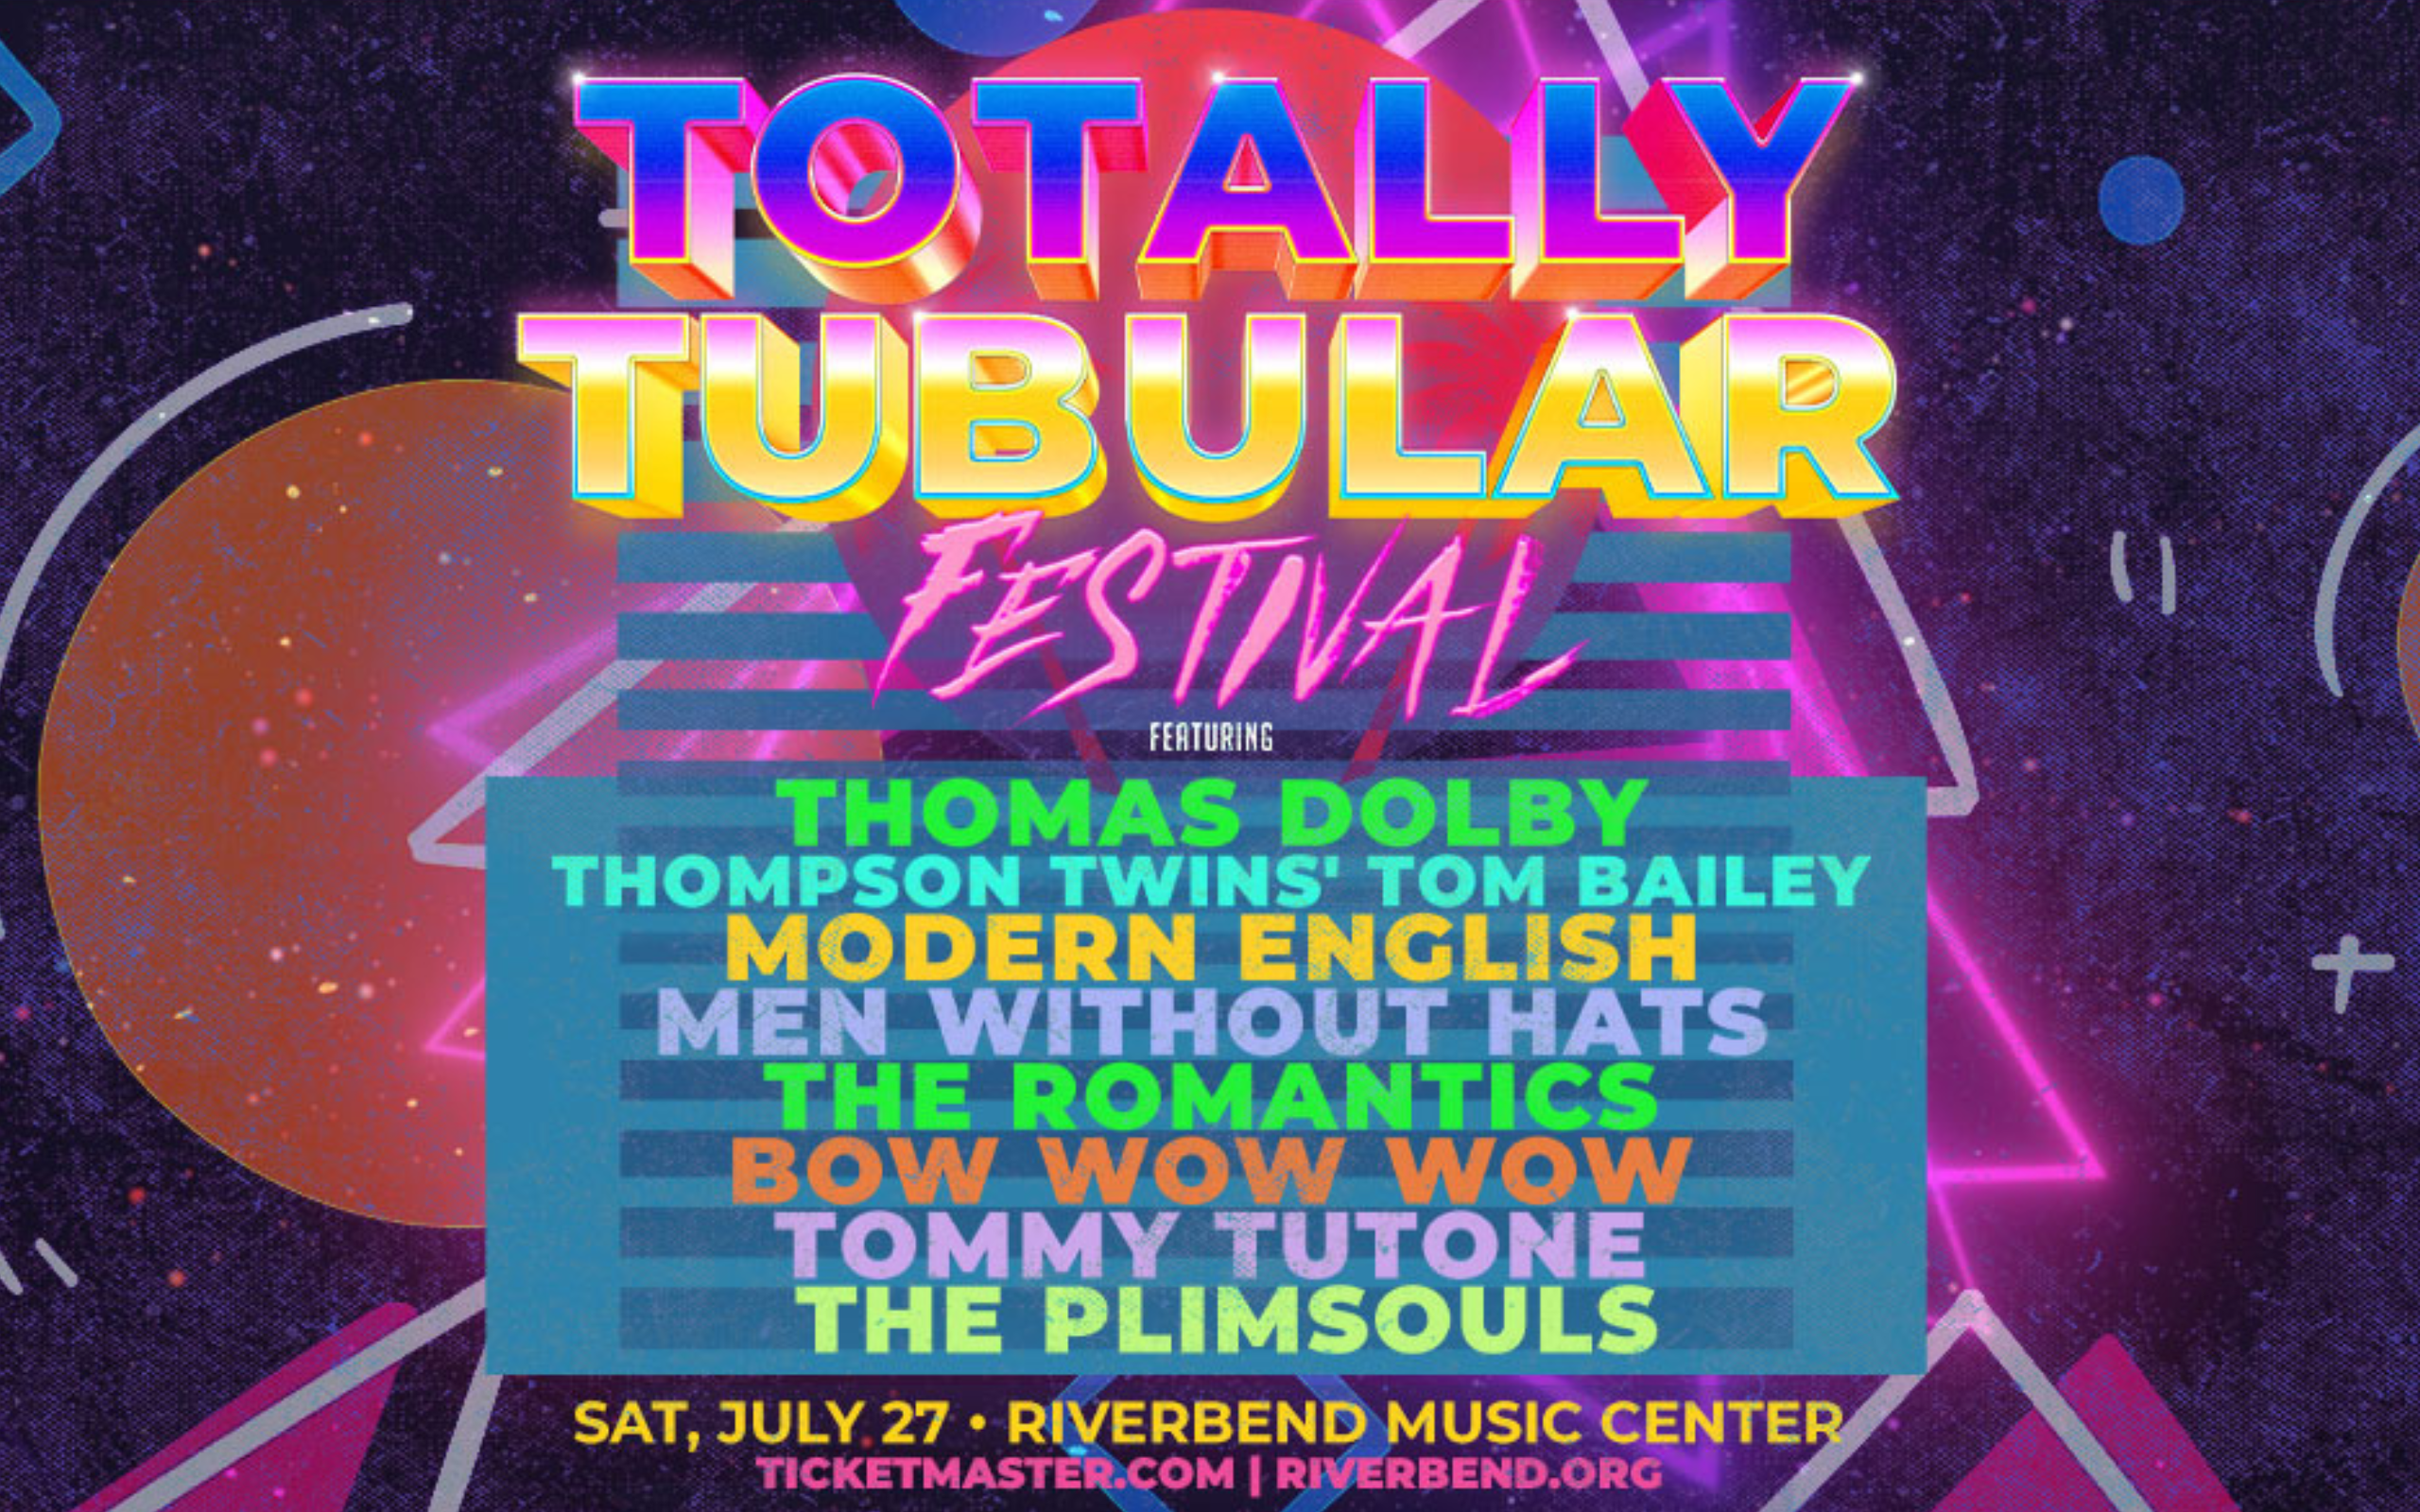 <h1 class="tribe-events-single-event-title">Totally Tubular Festival w/ Thomas Dolby, Thompson Twins, Modern English + More</h1>